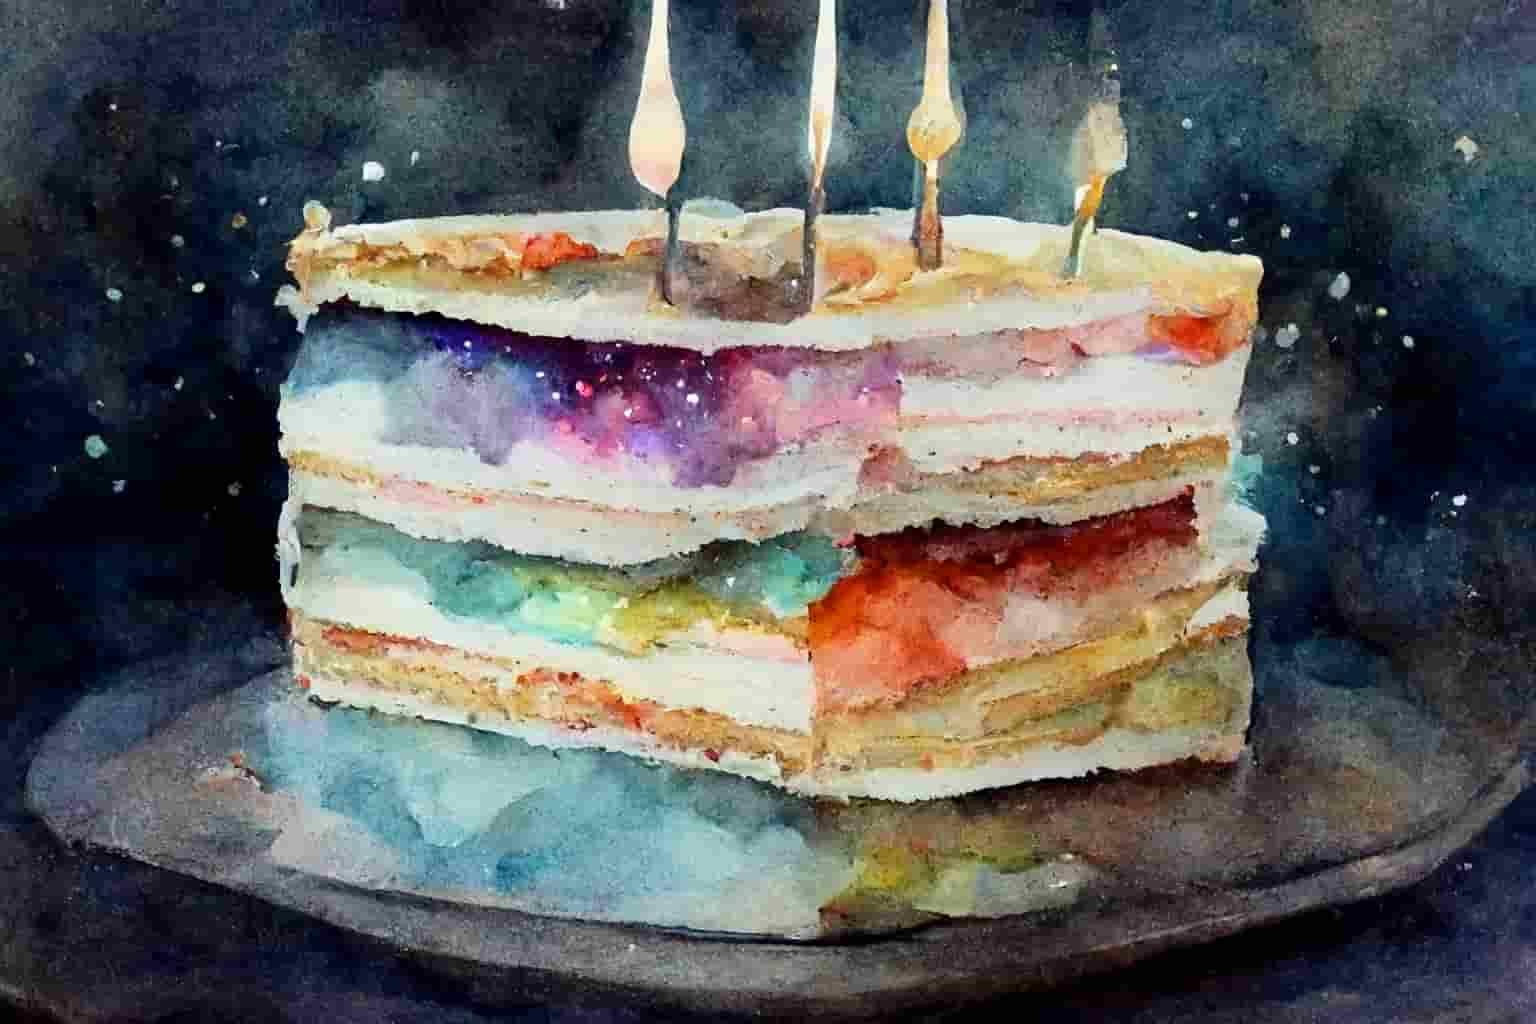 A watercolor painting of a multi-colored birthday cake